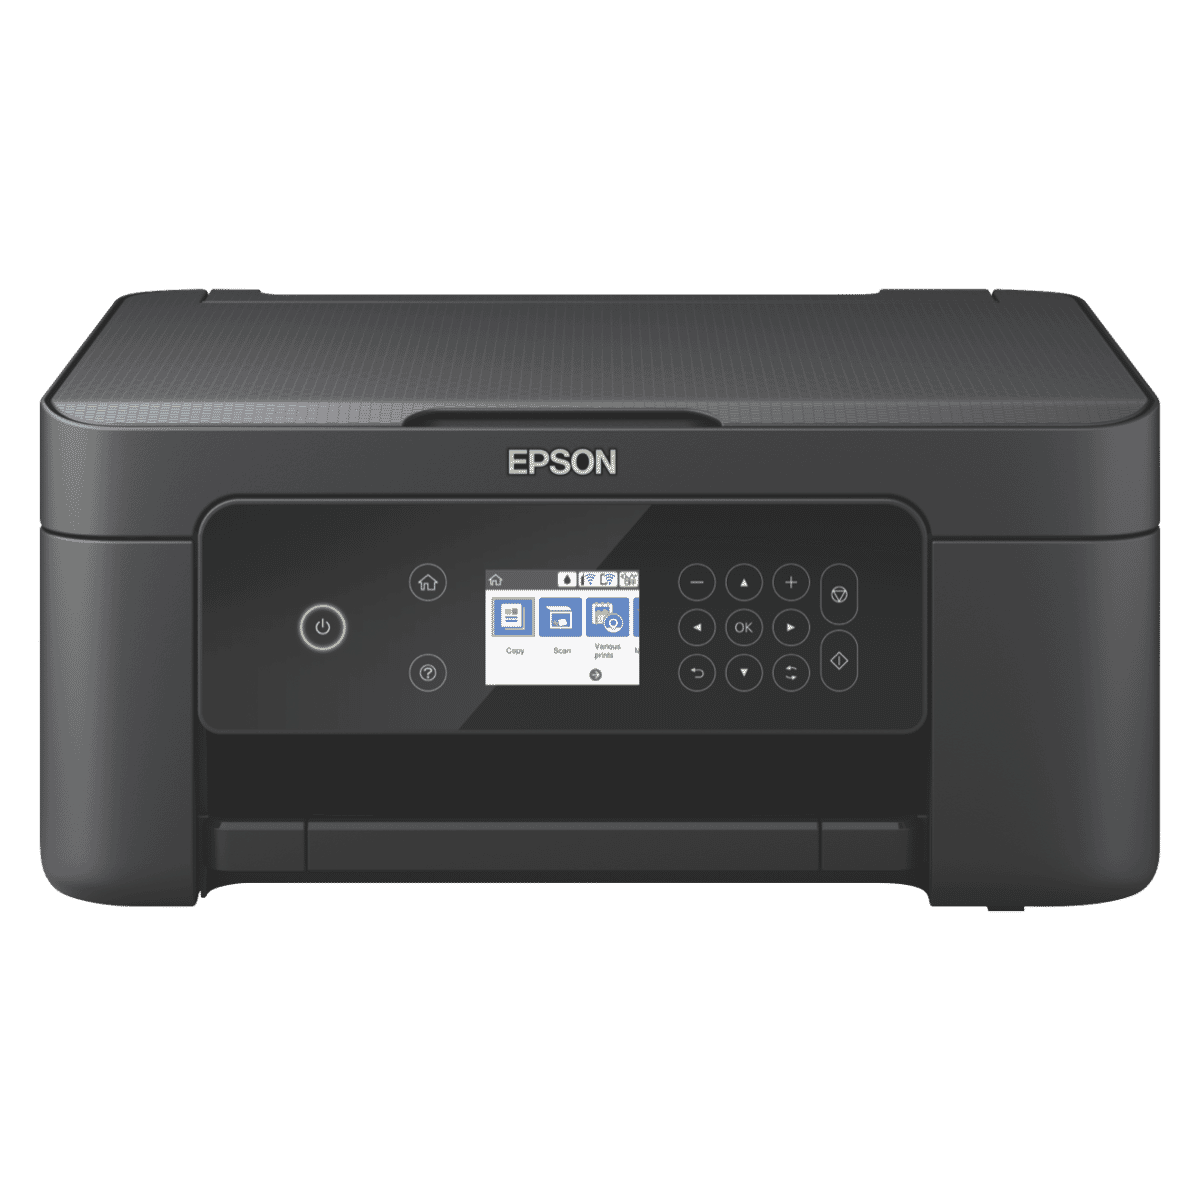  Epson  XP  4100 Expression Home Printer XP  4100 at The Good Guys